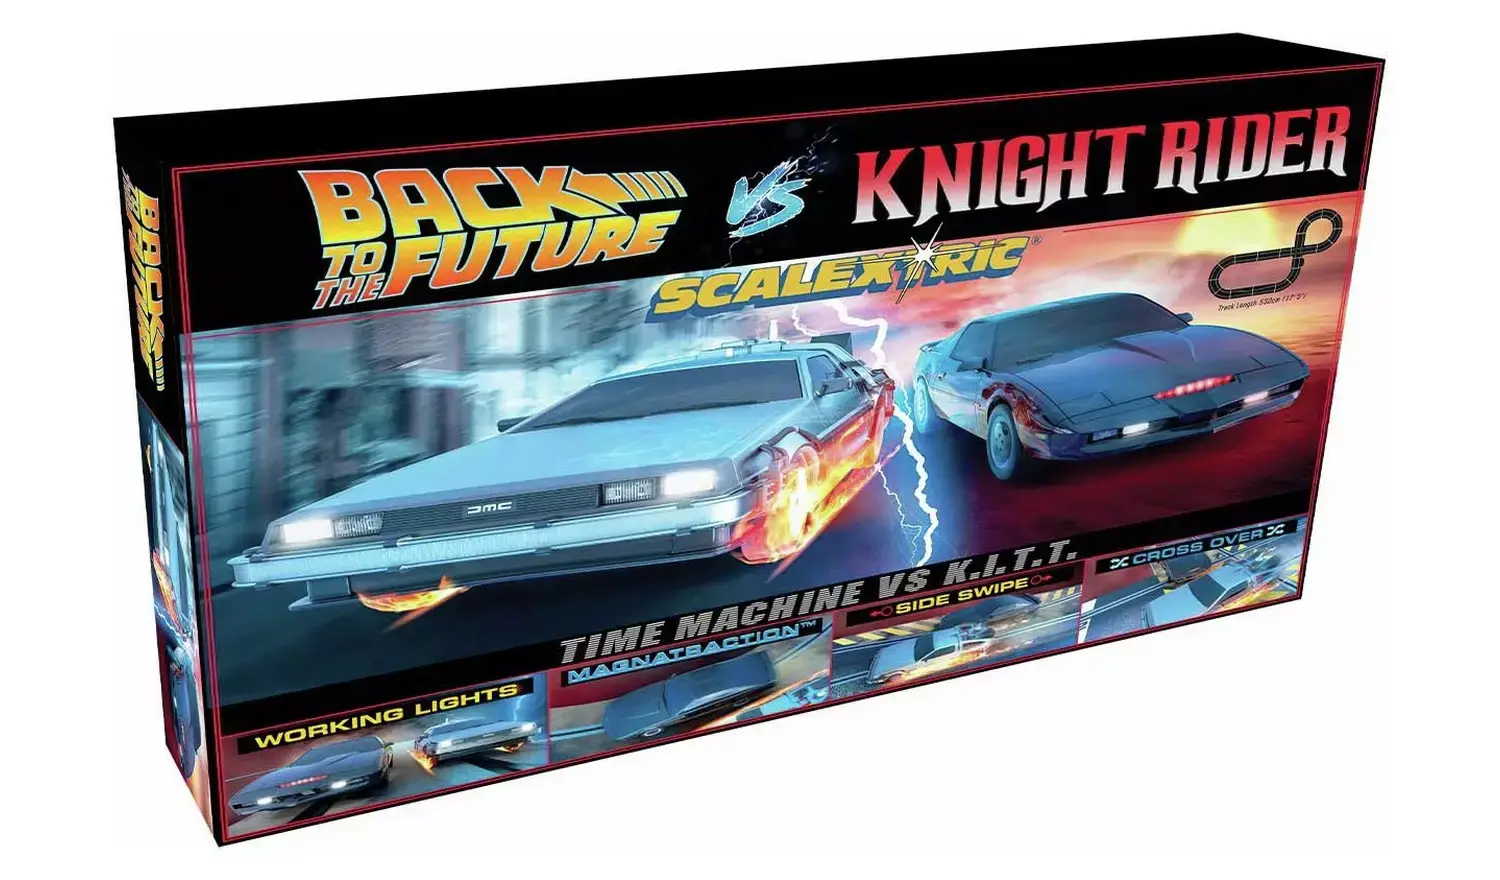 SCALEXTRIC 1980s TV BACK TO THE FUTURE VS KNIGHT RIDER